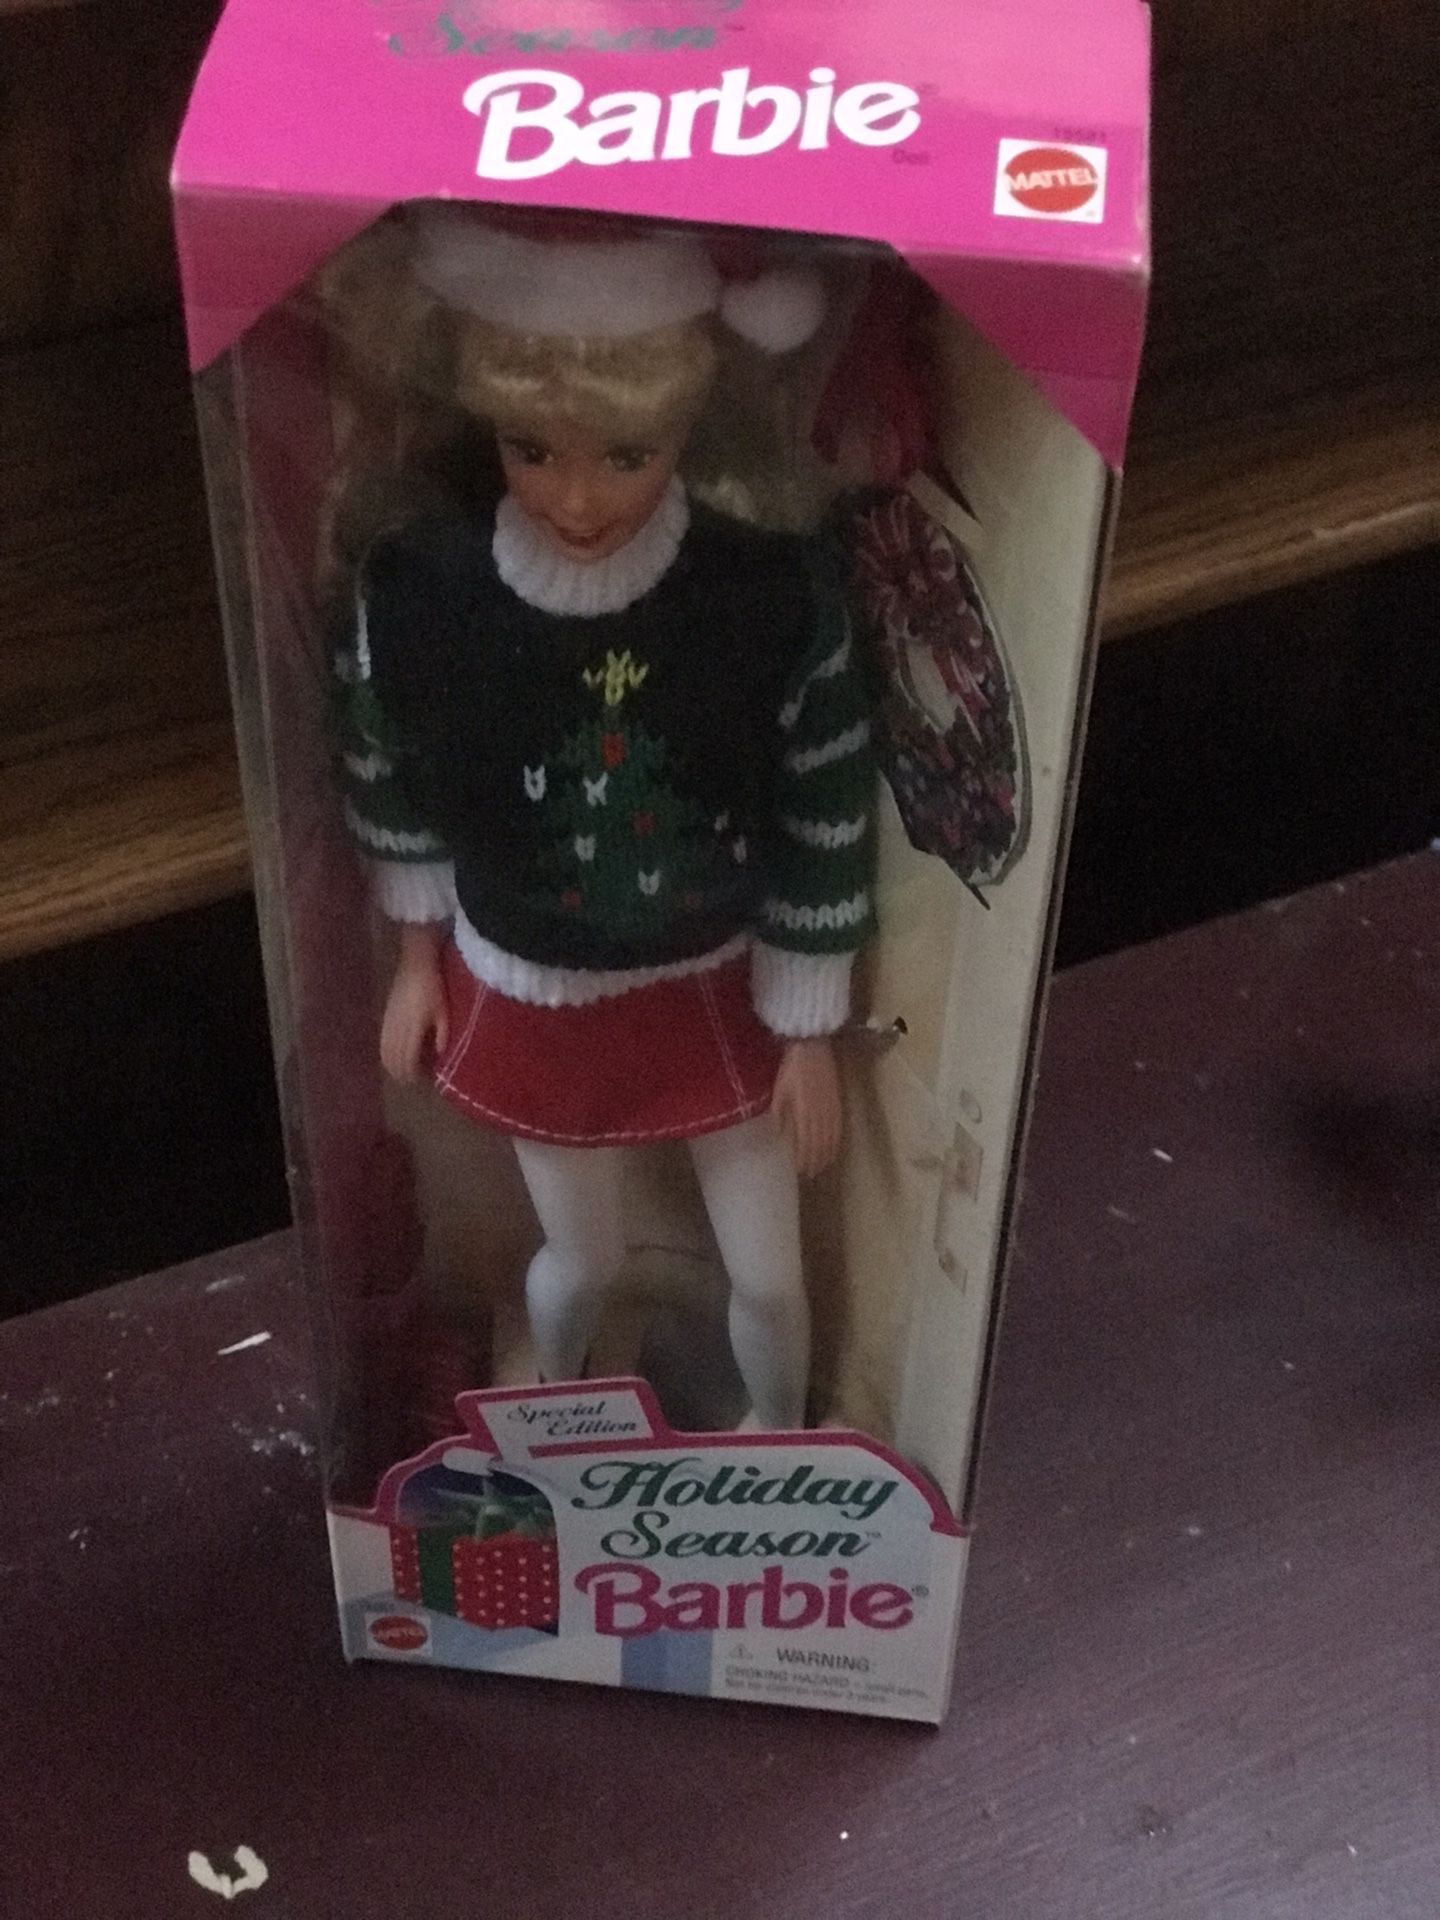 1996 Holiday Season Barbie Doll Special Edition by Barbie